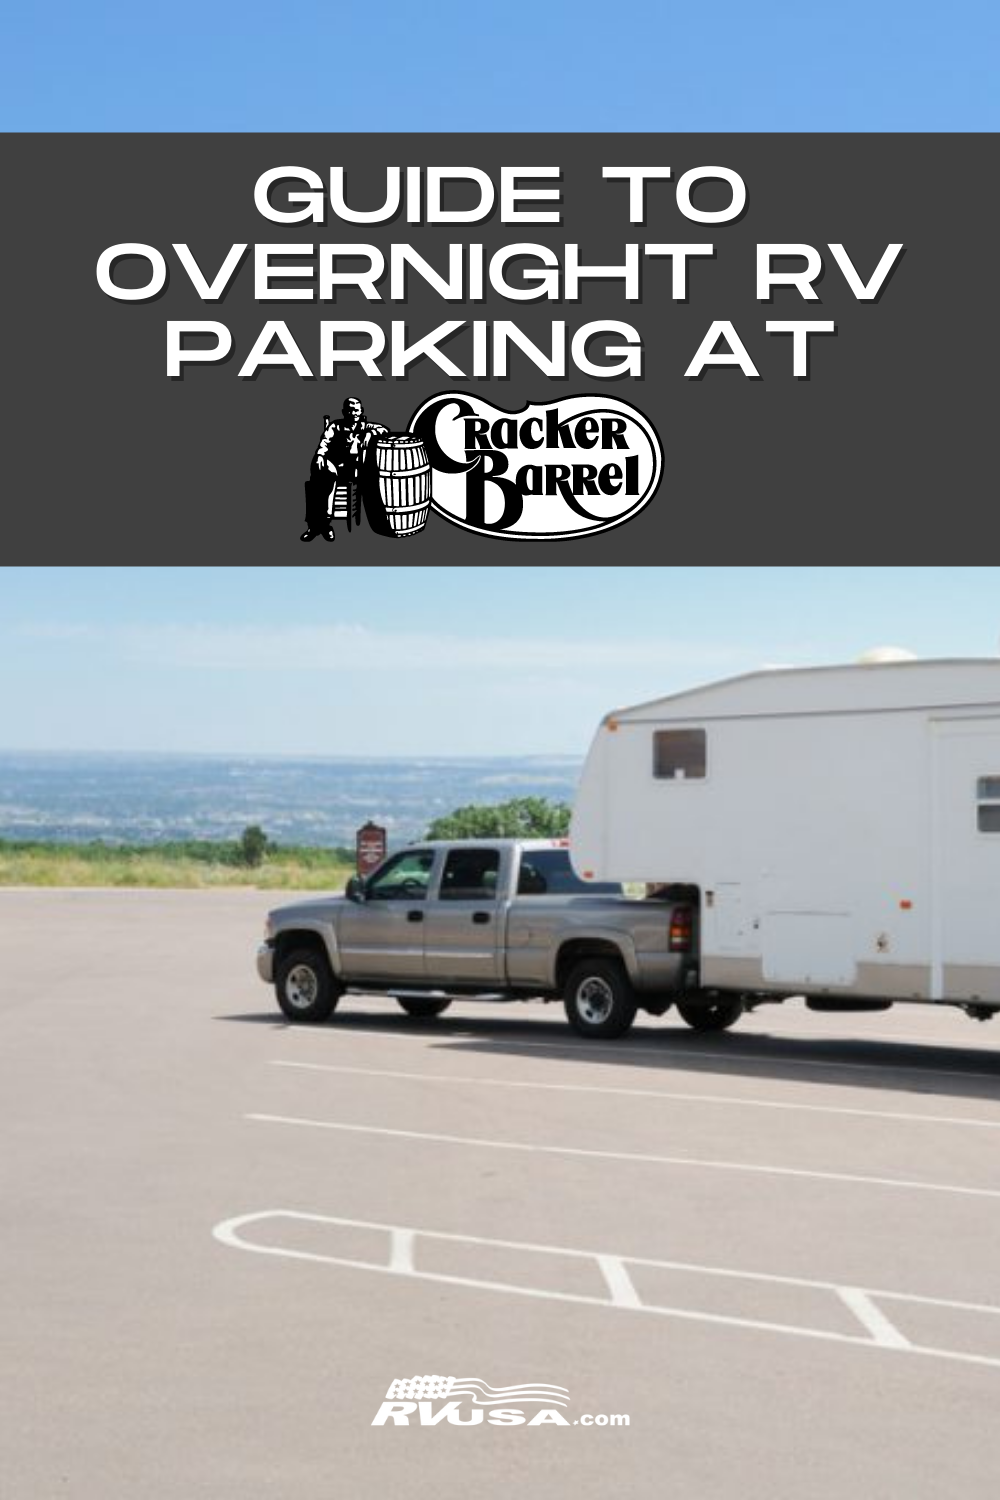 Guide to Overnight RV Parking at Cracker Barrel